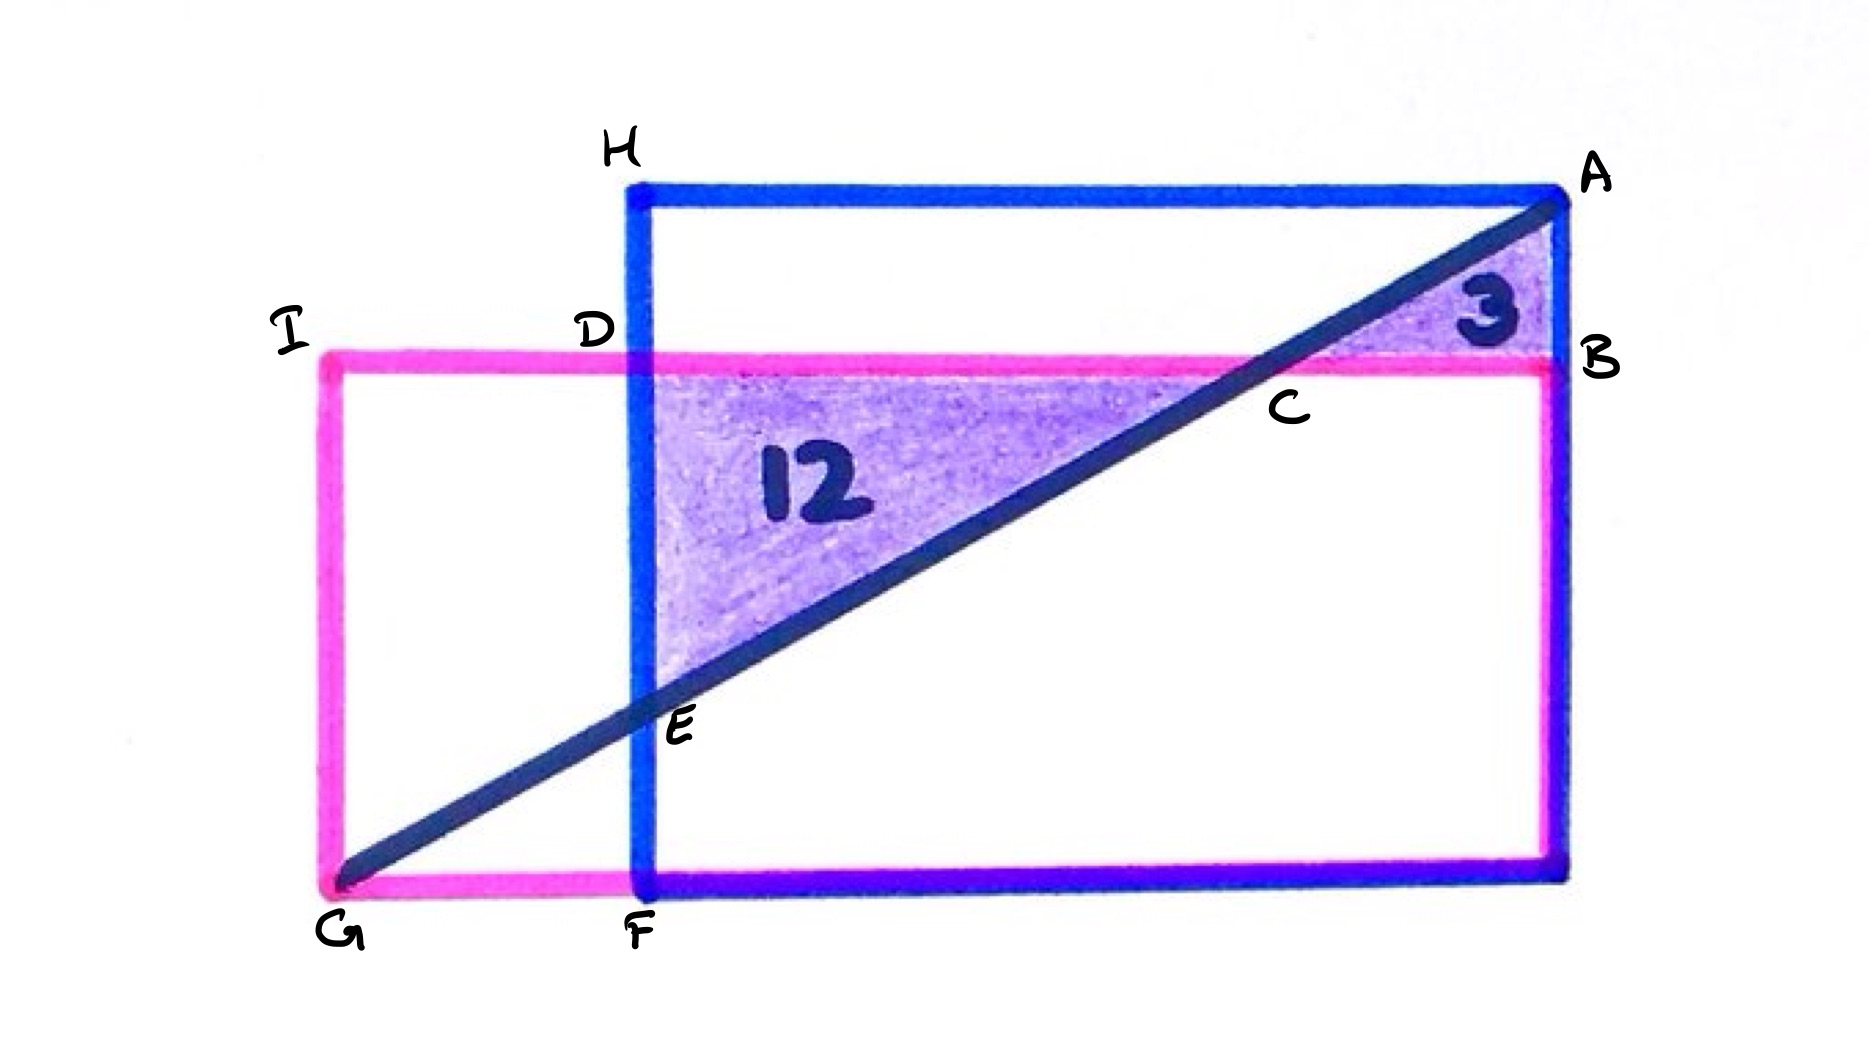 Two rectangles of equal area labelled